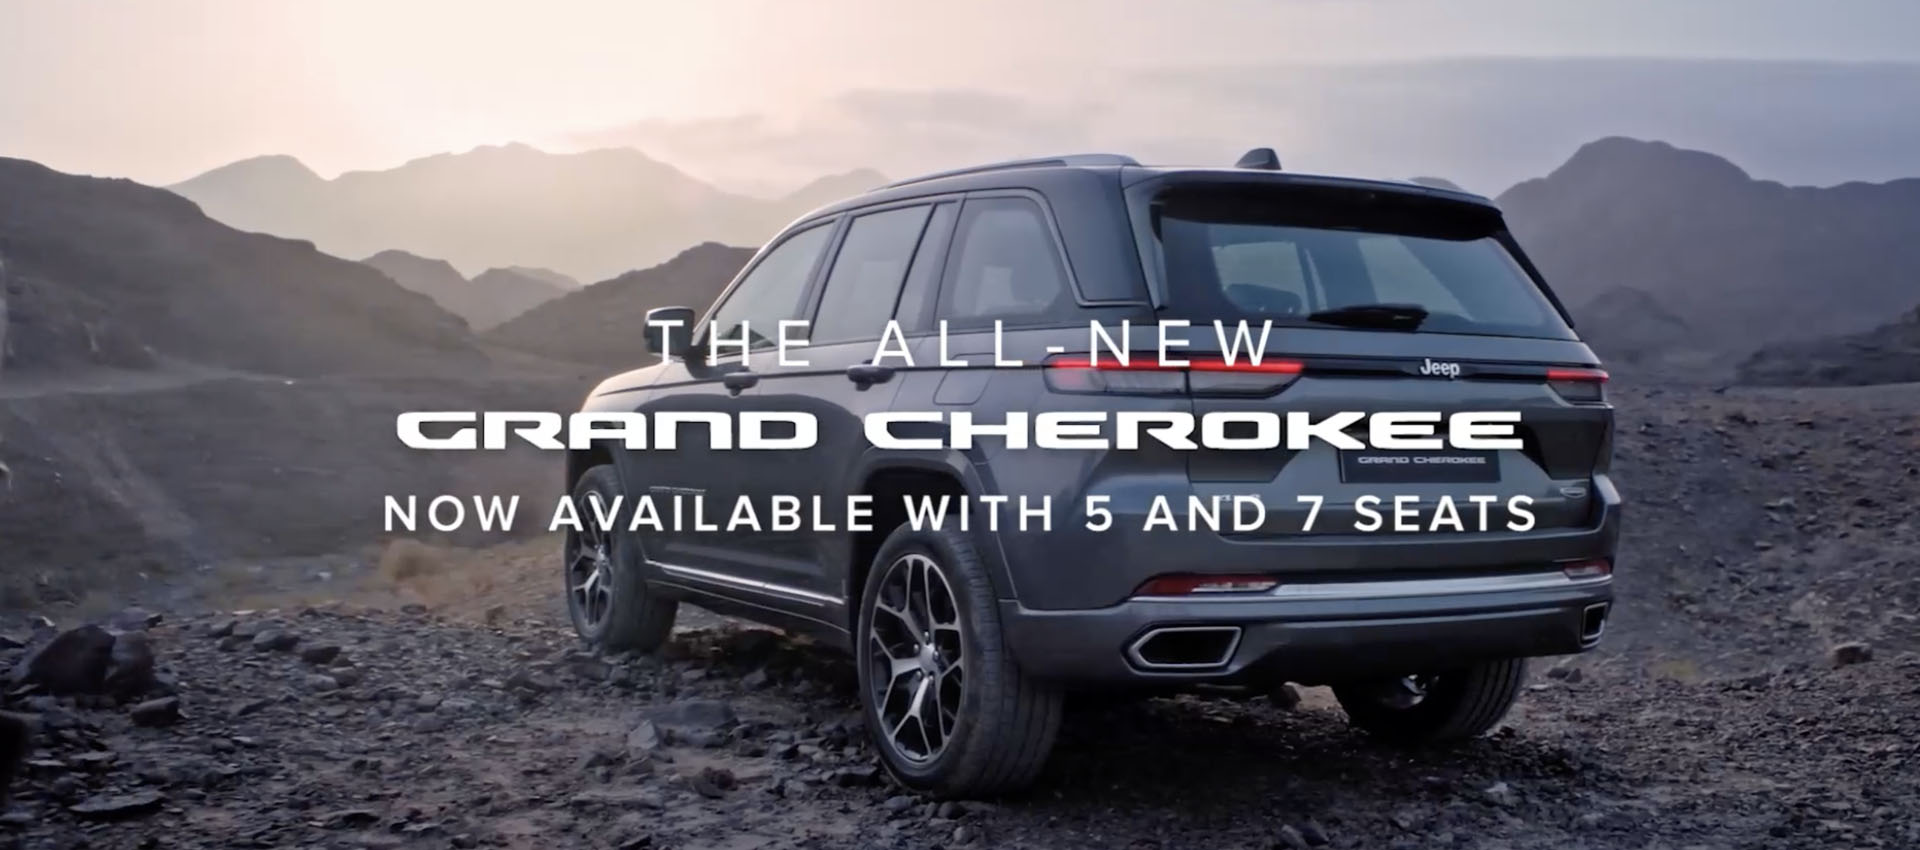 Jeep® Grand Cherokee Pricing & Specs - Most Awarded SUV Ever